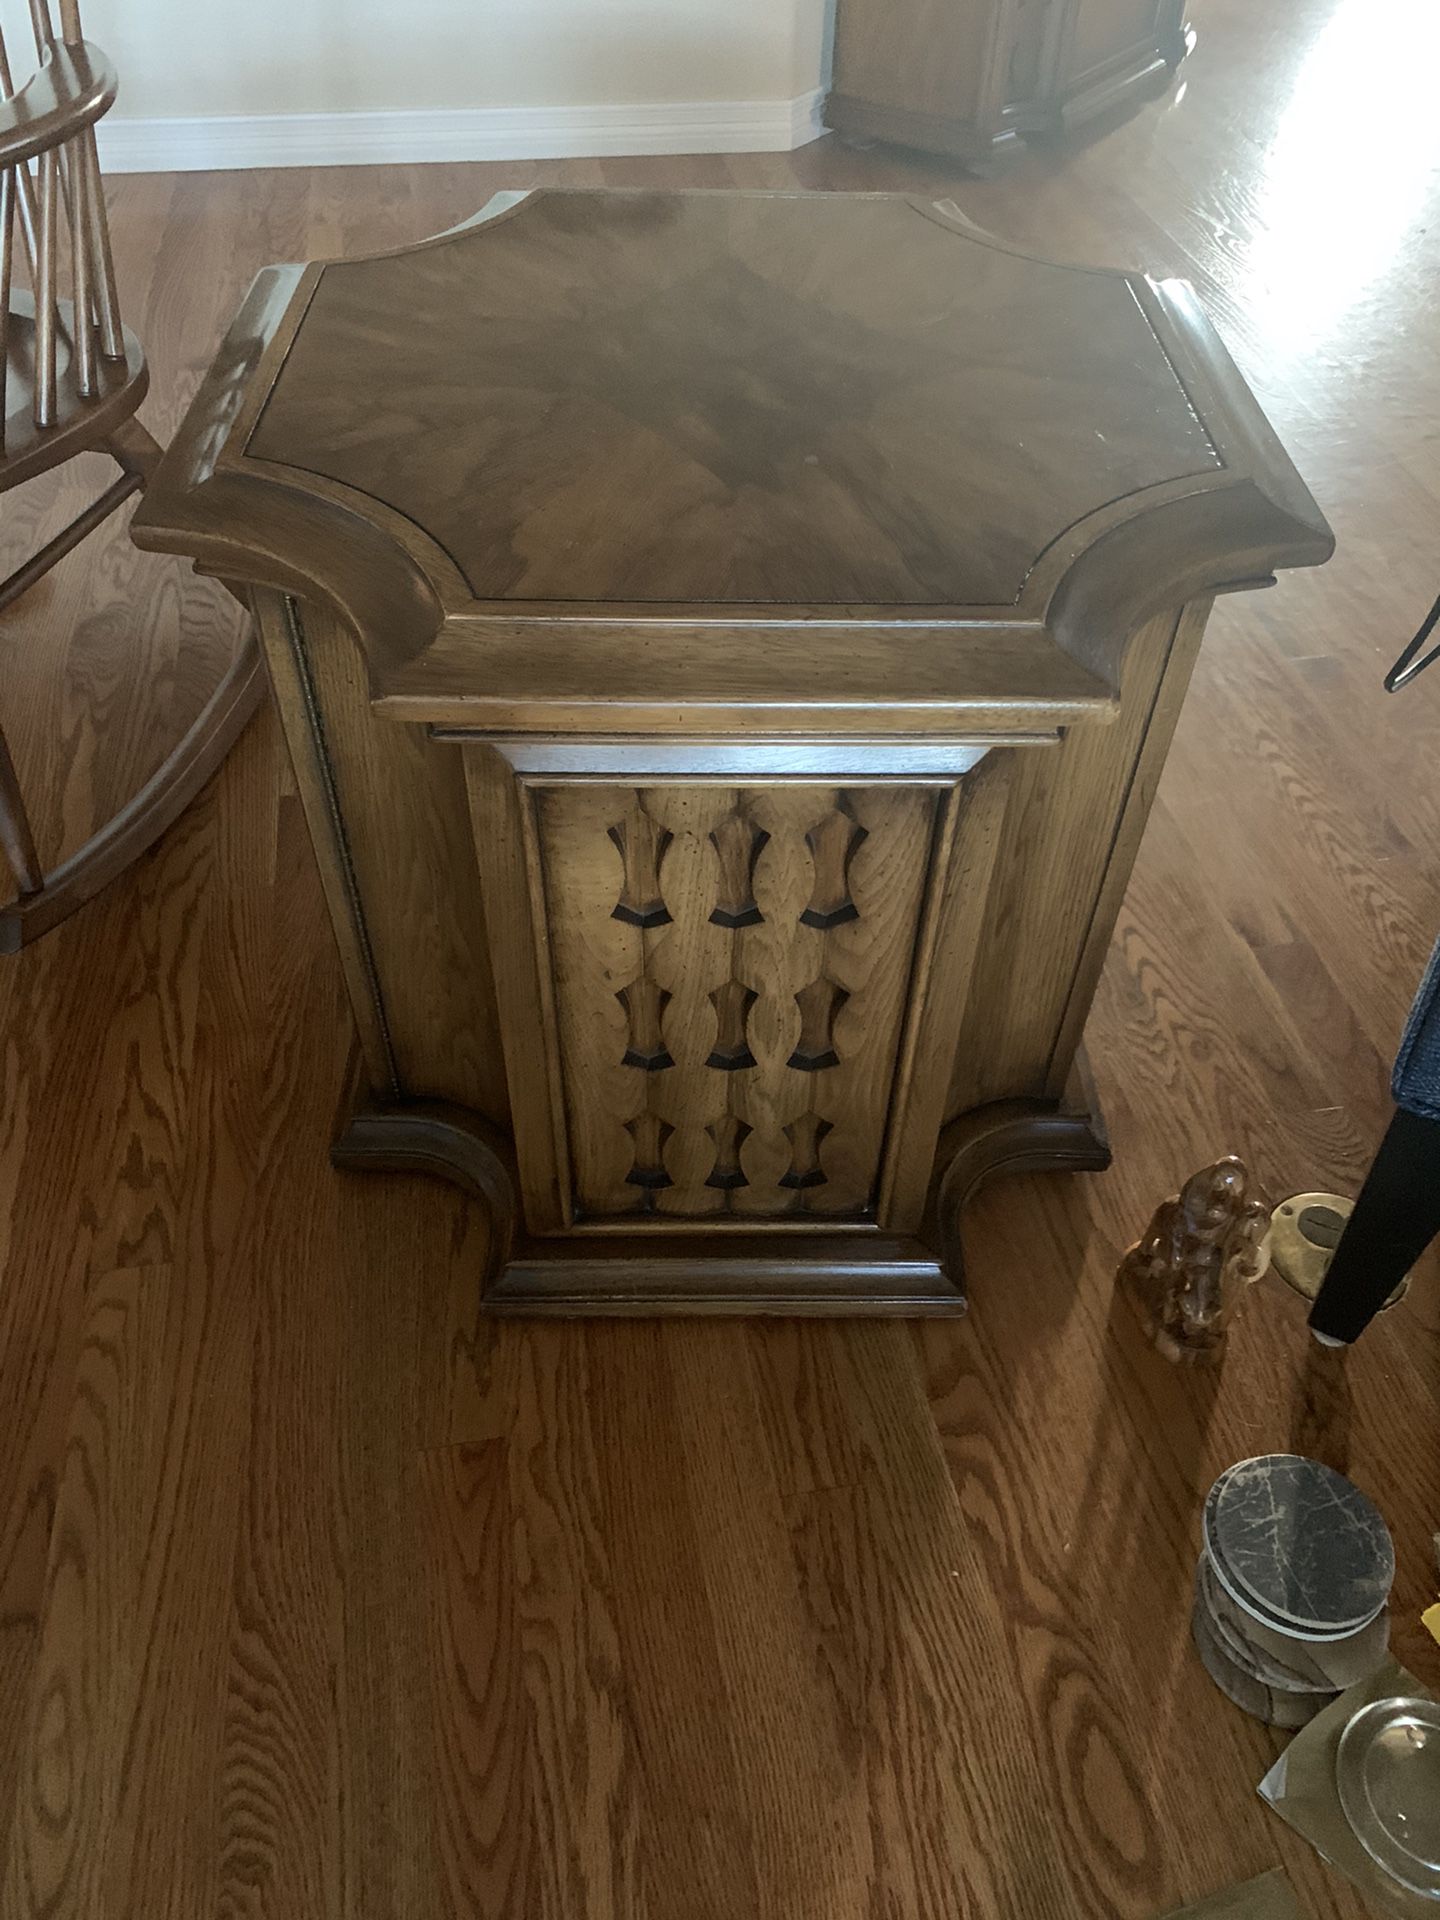 End table with cabinet